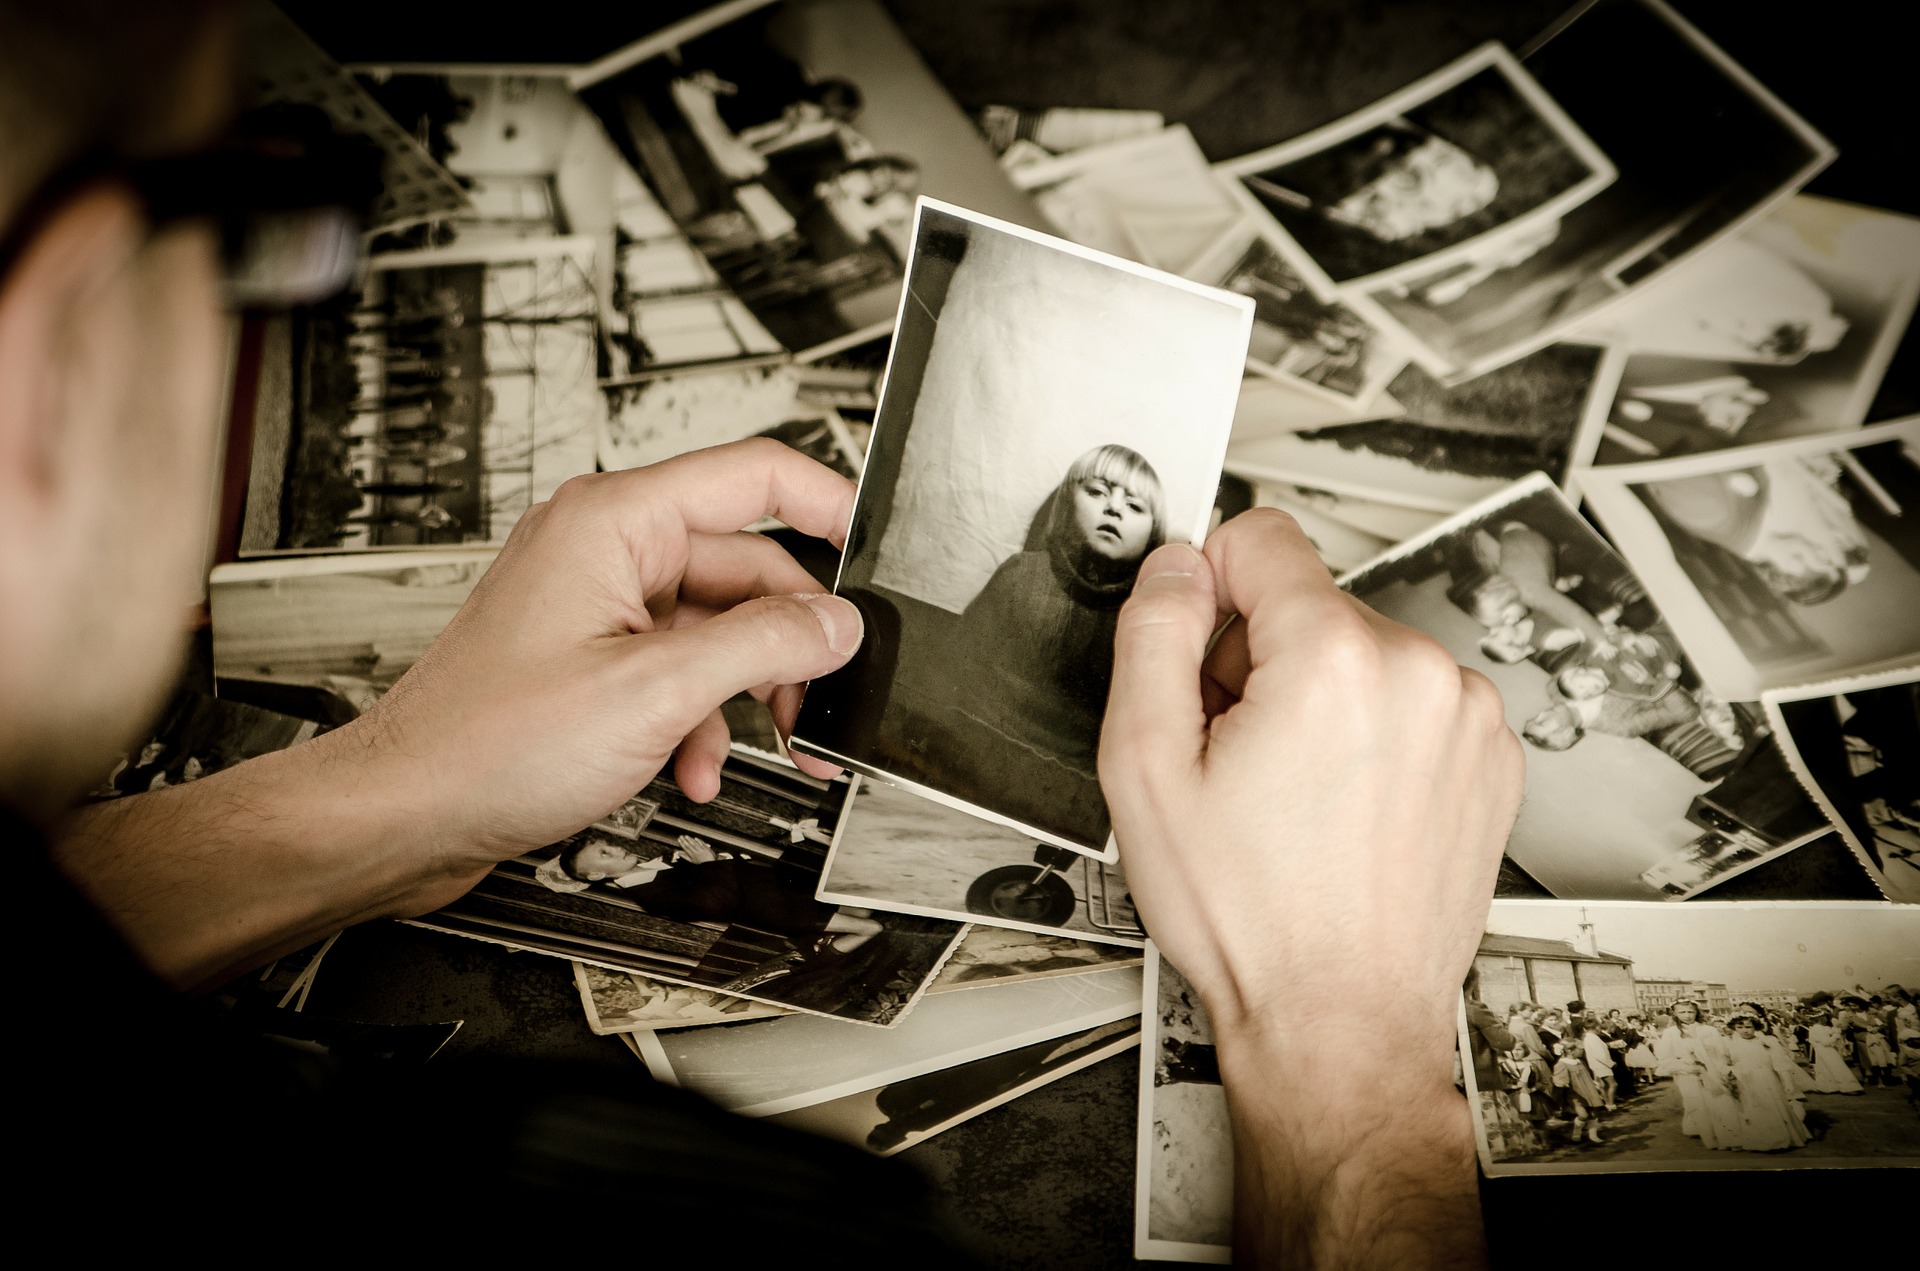 Image of someone looking through old photographs